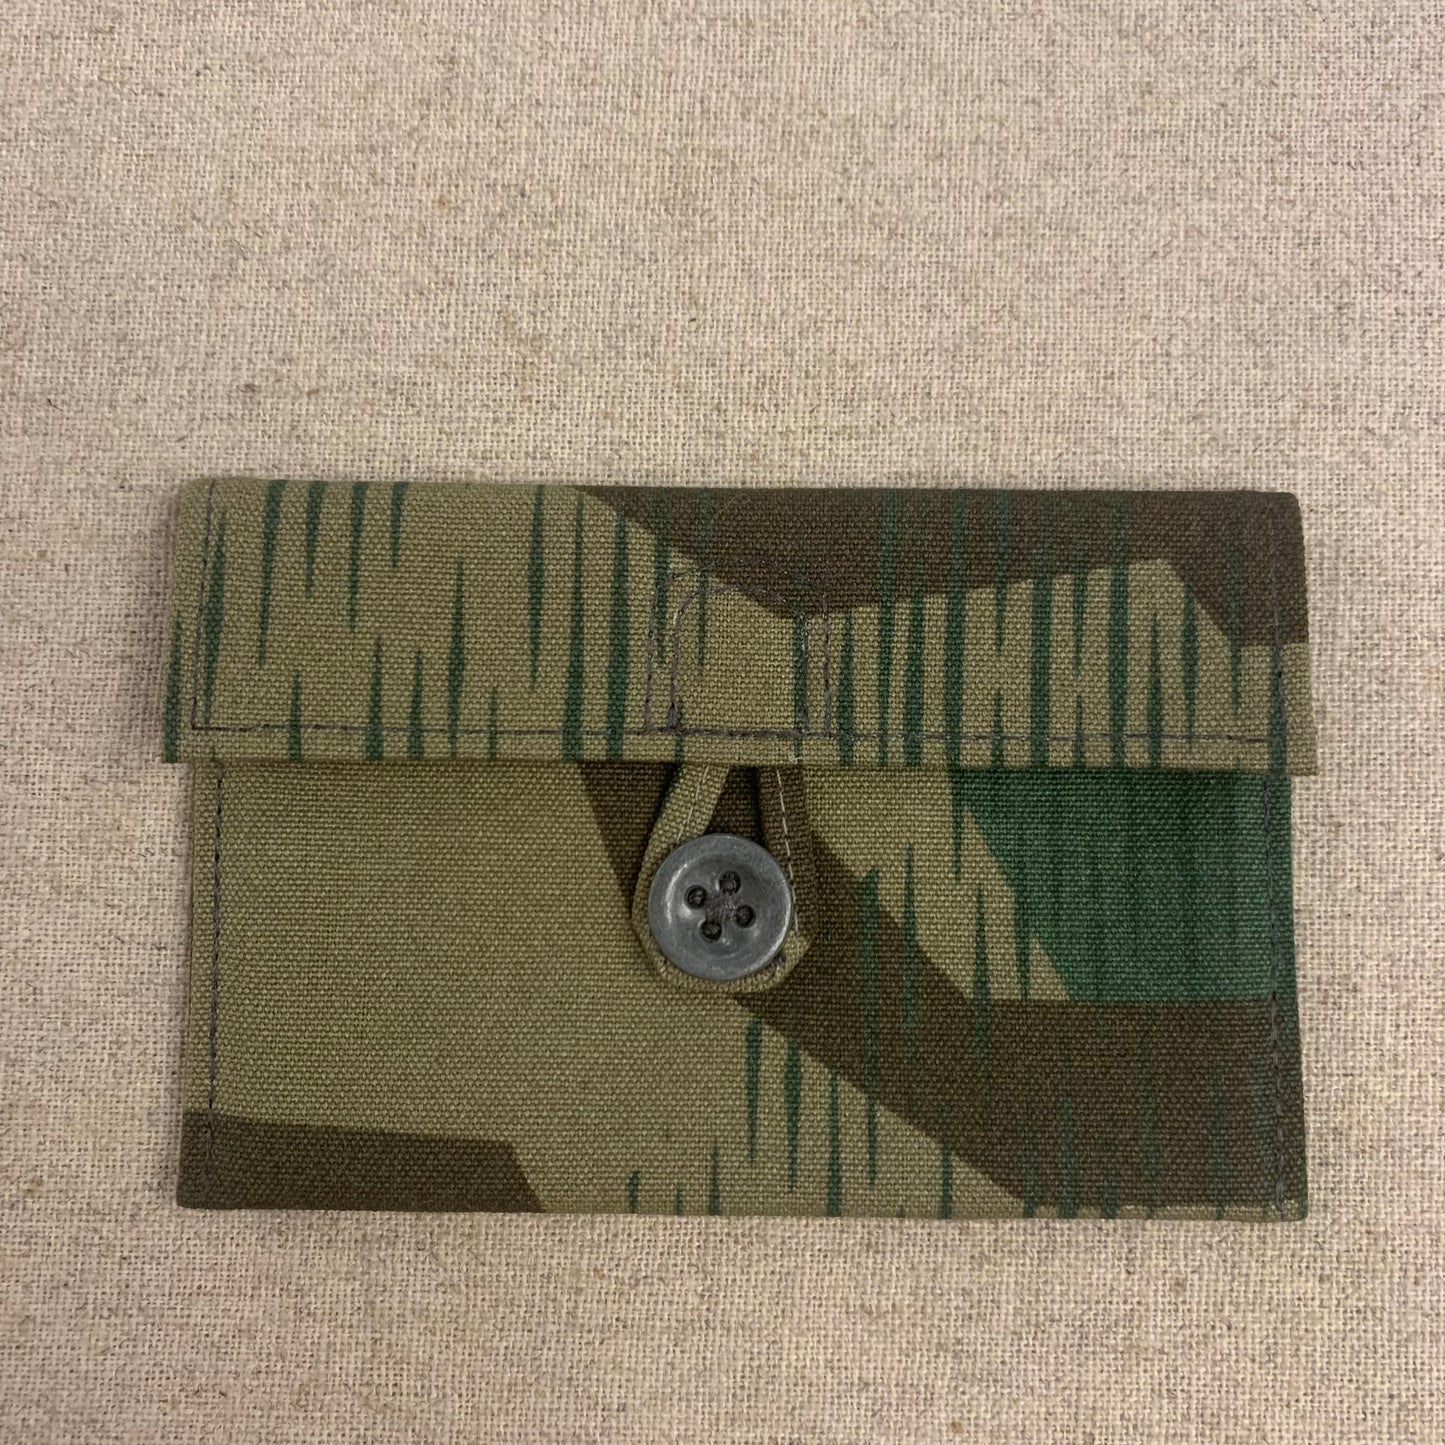 Personal item pouch